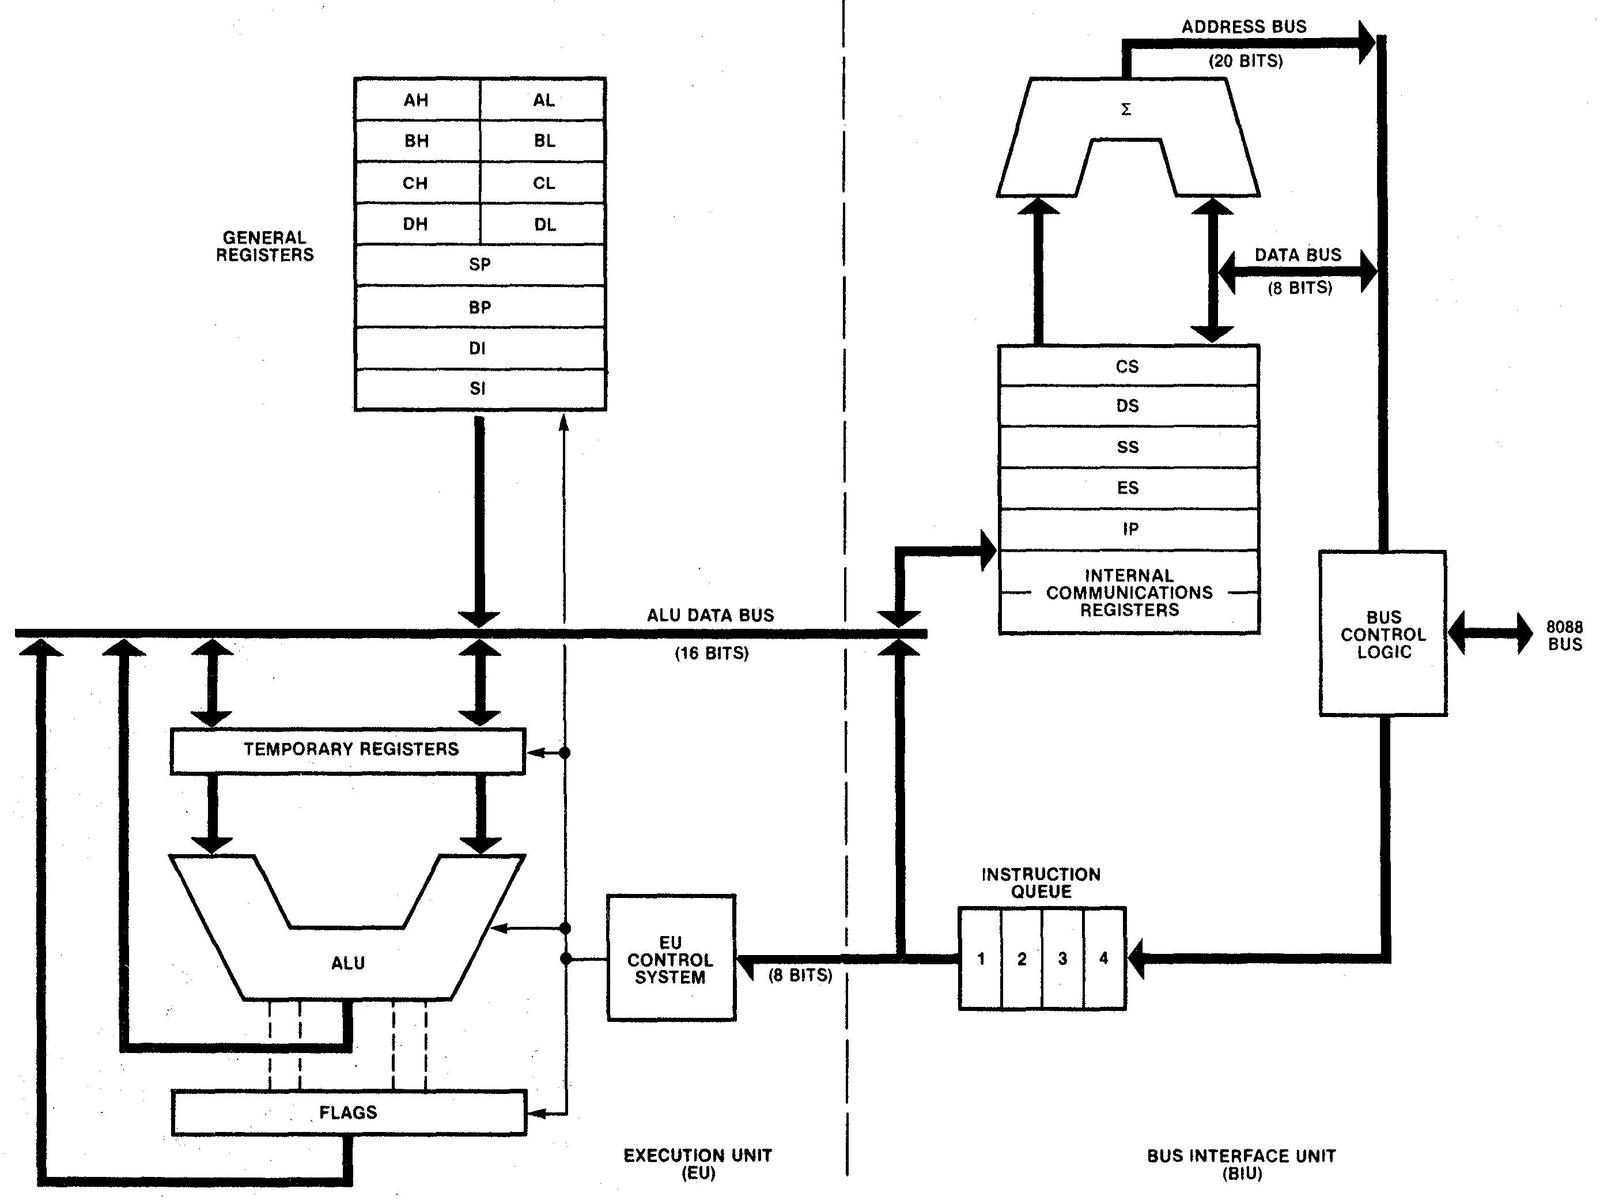 Block diagram of the 8088 processor.
This diagram differs from most 8088 block diagrams because it shows the actual physical implementation, rather than the programmer's view of the processor.
The "Internal Communication Registers" consist of the Indirect Register (IND) and the Operand Register (OPR). These hold a memory address and memory data value respectively.
From The 8086 Family User's Manual page 243.